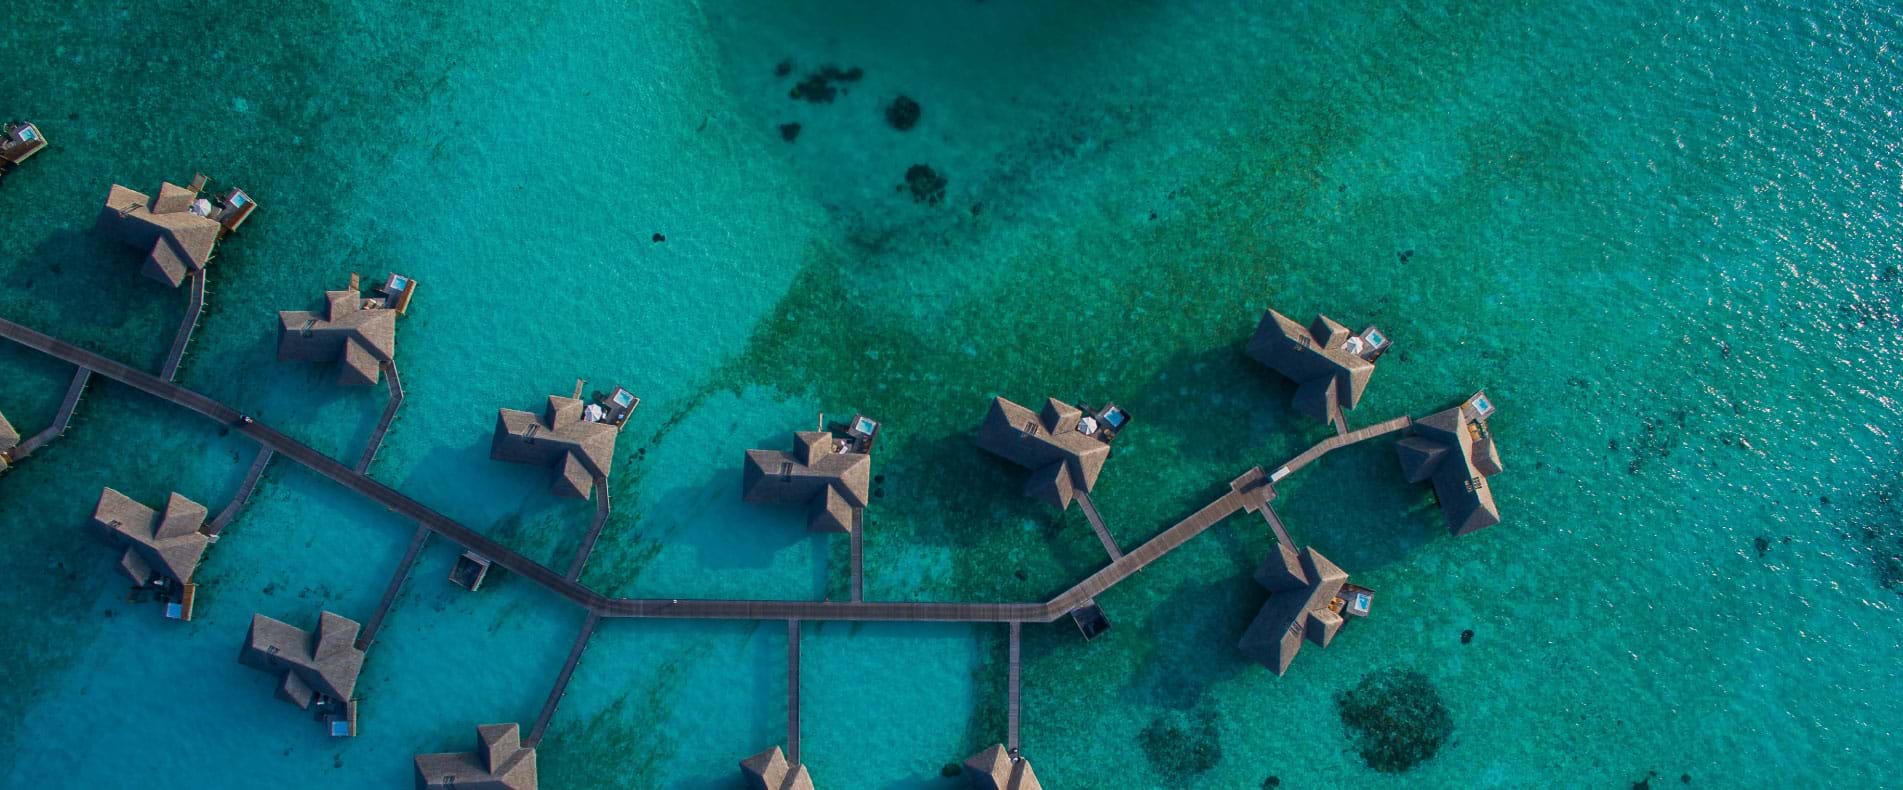 North Central Province, Maldives, Overwater Bungalows